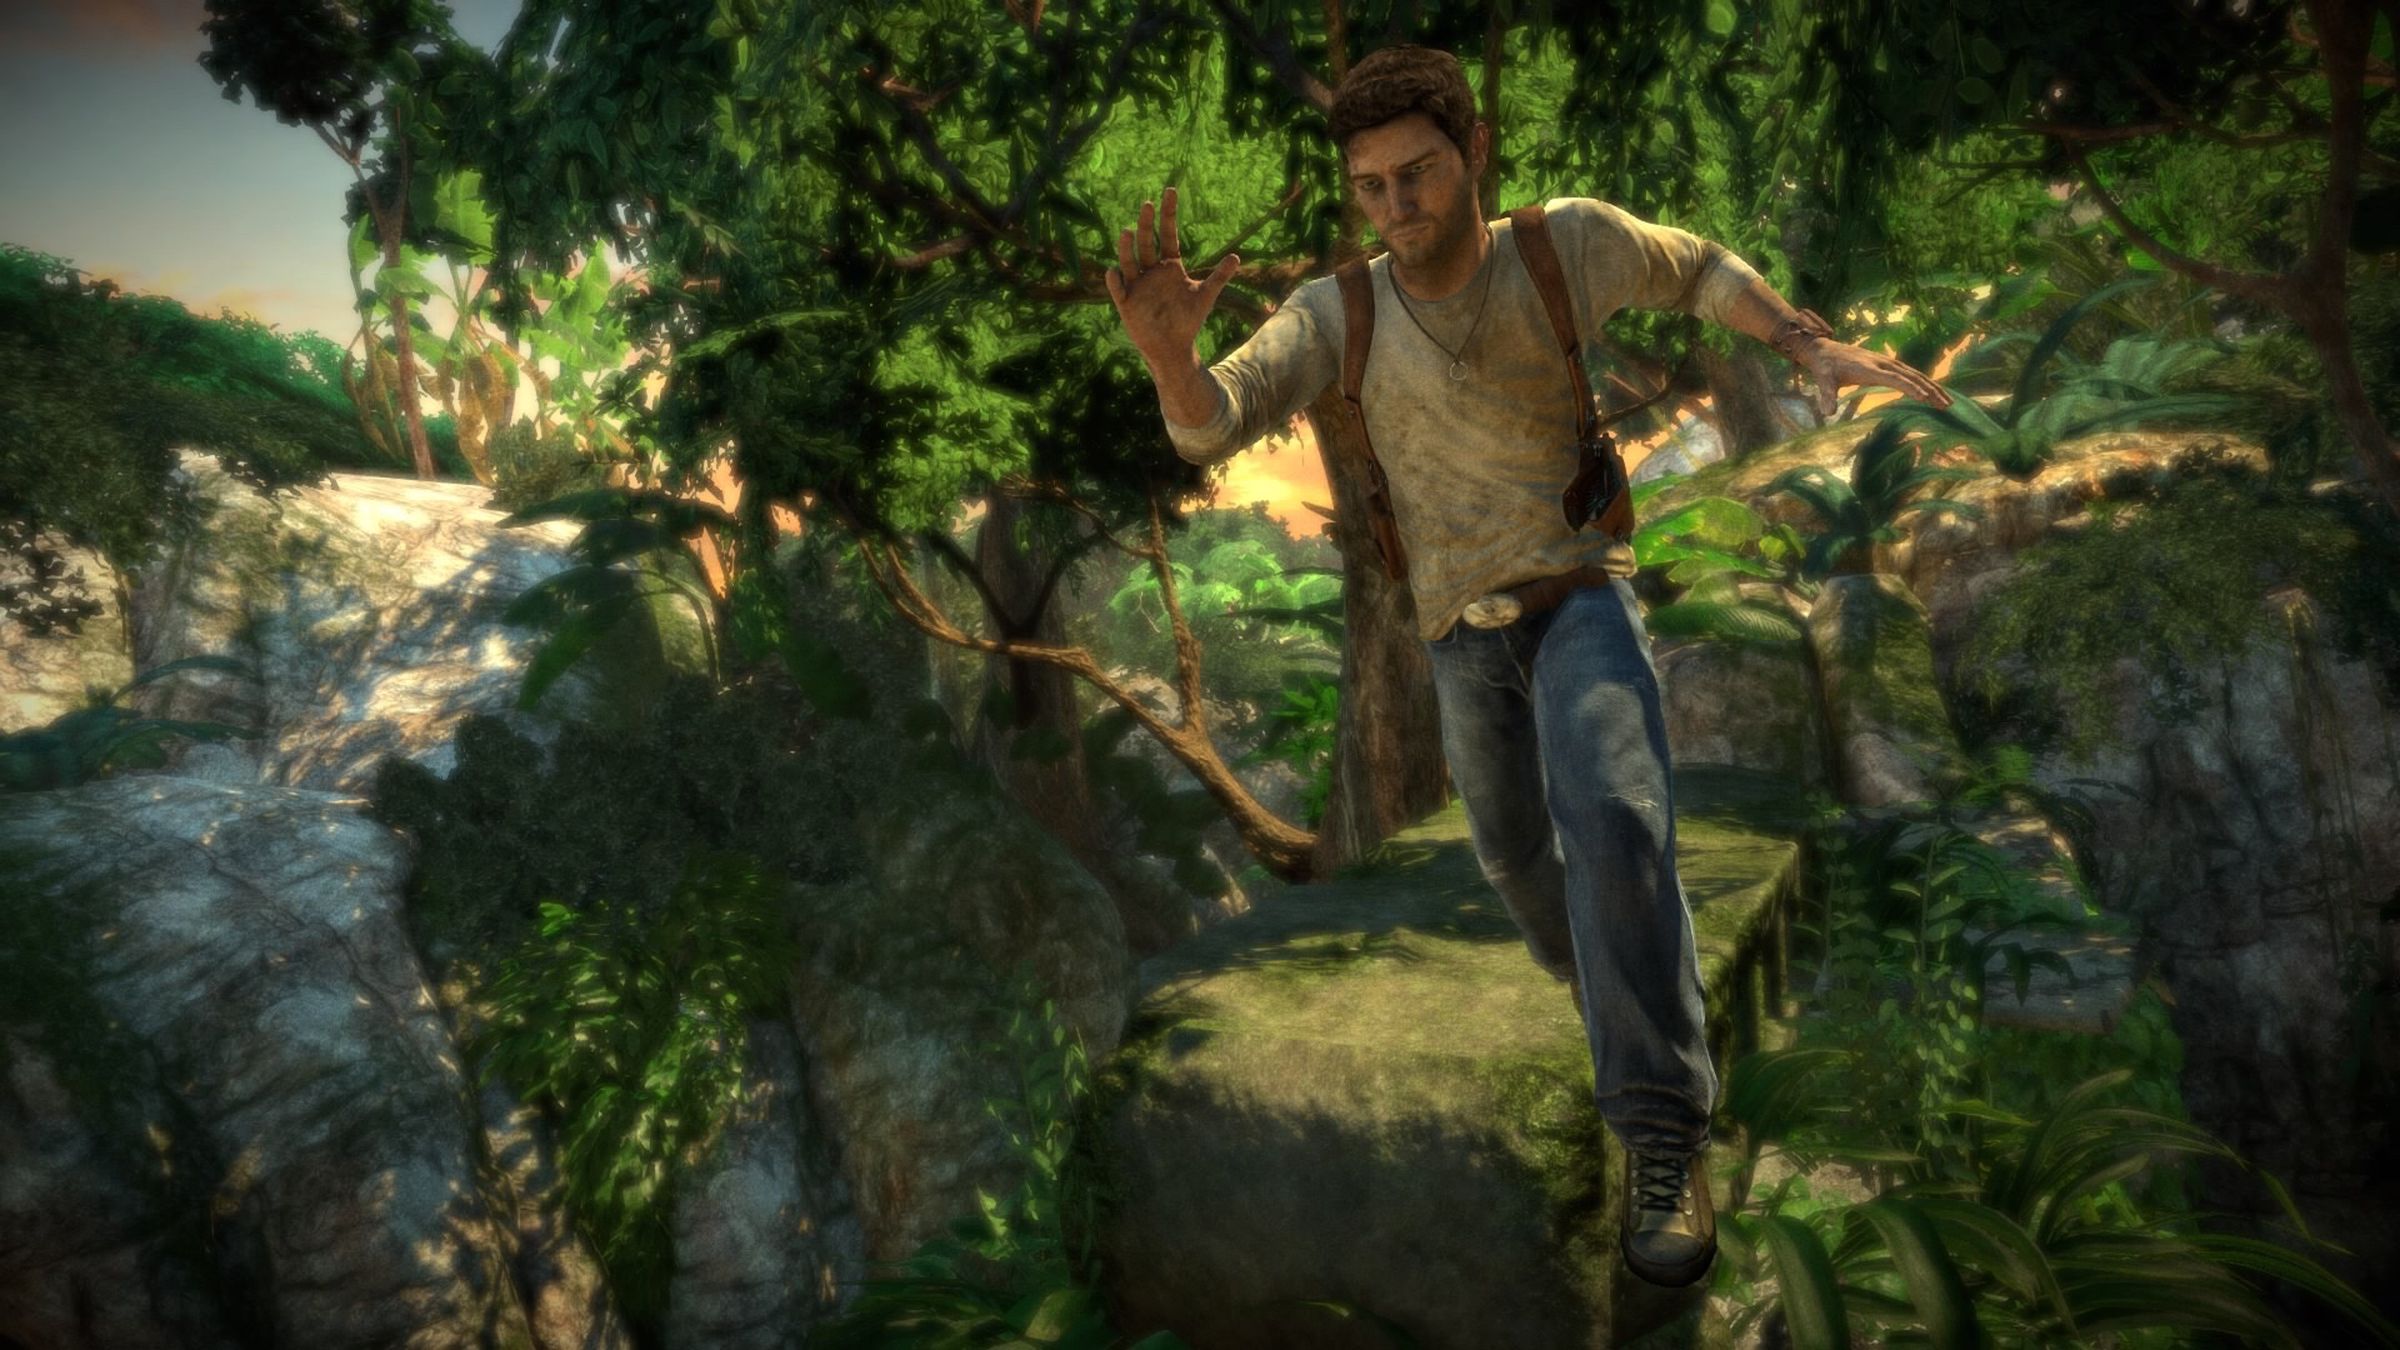 Uncharted: The Nathan Drake Collection photo mode shots